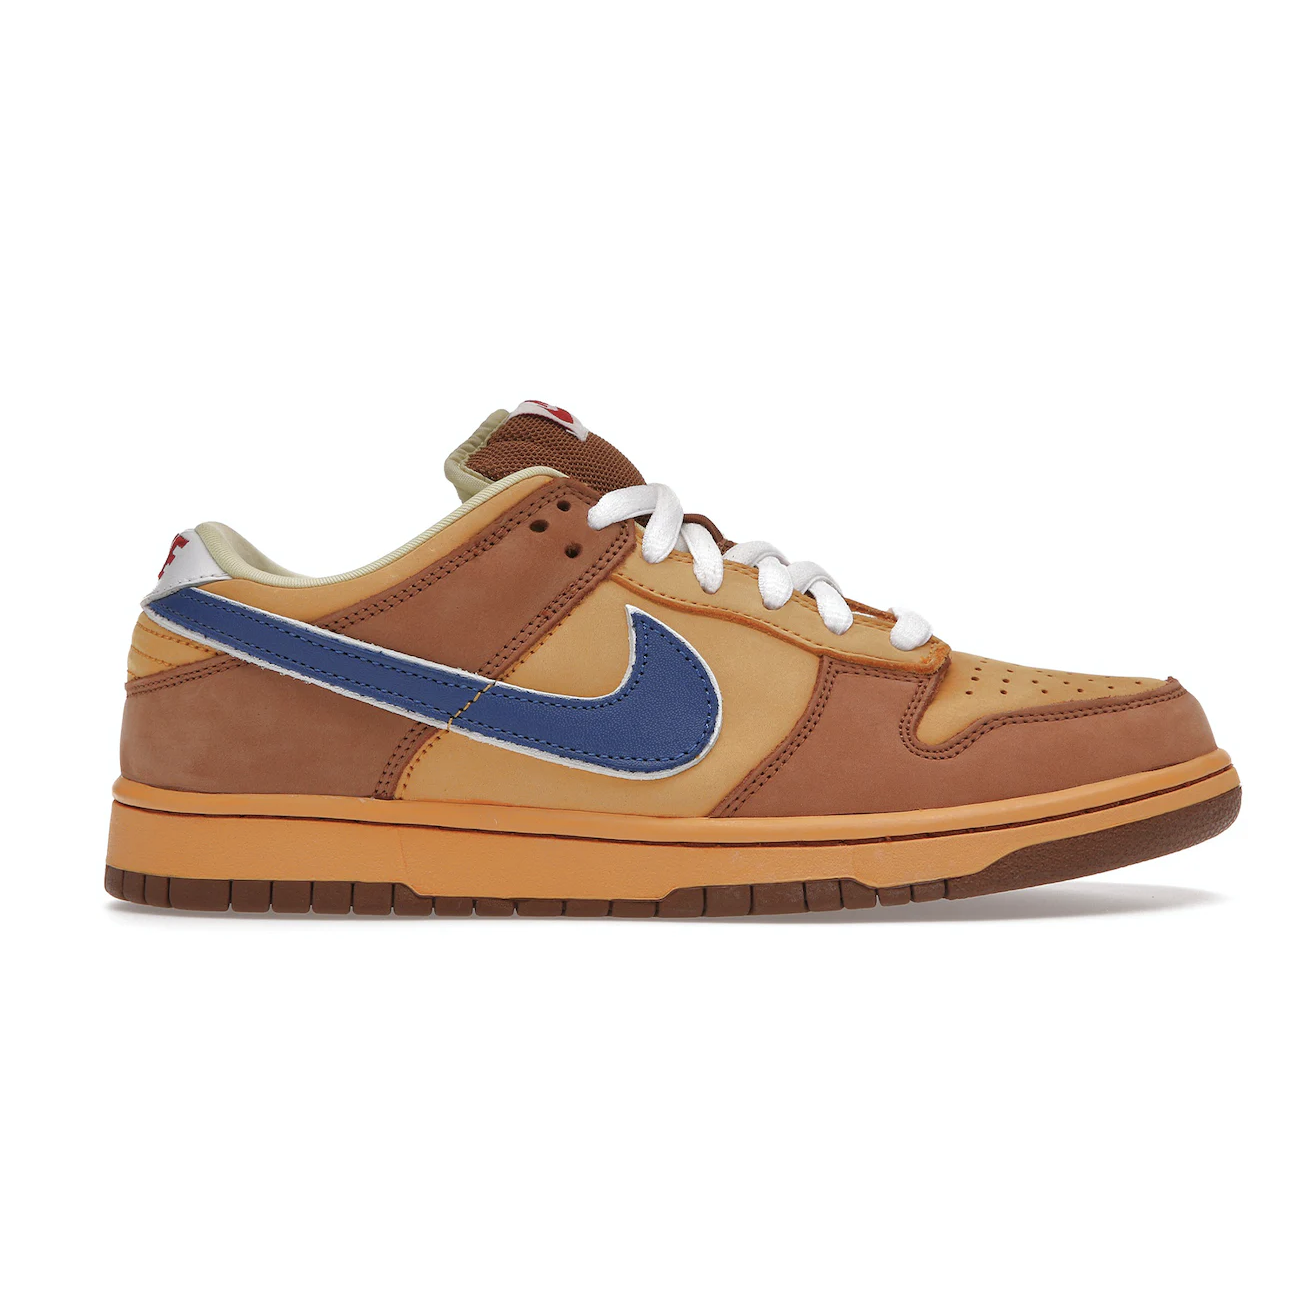 Nike SB Dunk Low Newcastle Brown Ale by Nike from £1300.00